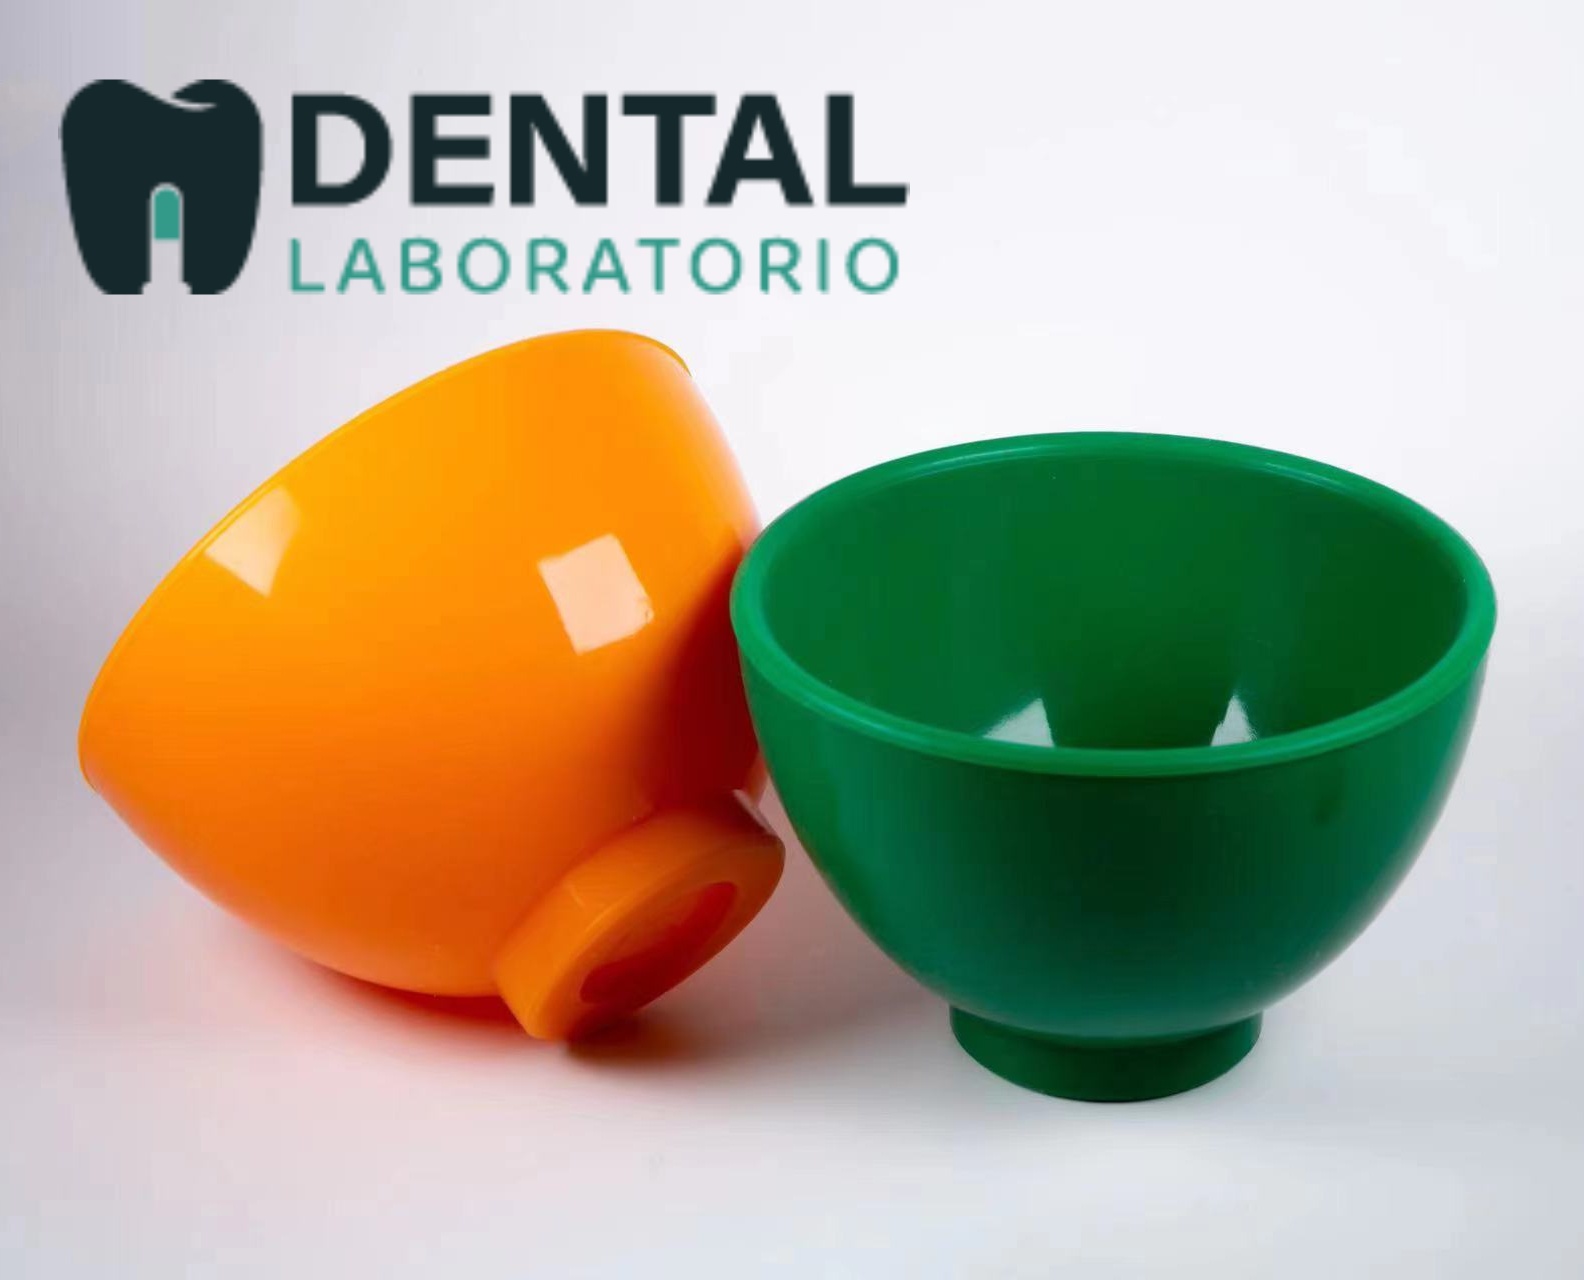 https://www.dentallaboratorio.com/wp-content/uploads/2020/06/rubber-mixing-bowl-for-dental-office-and-labortory.jpg